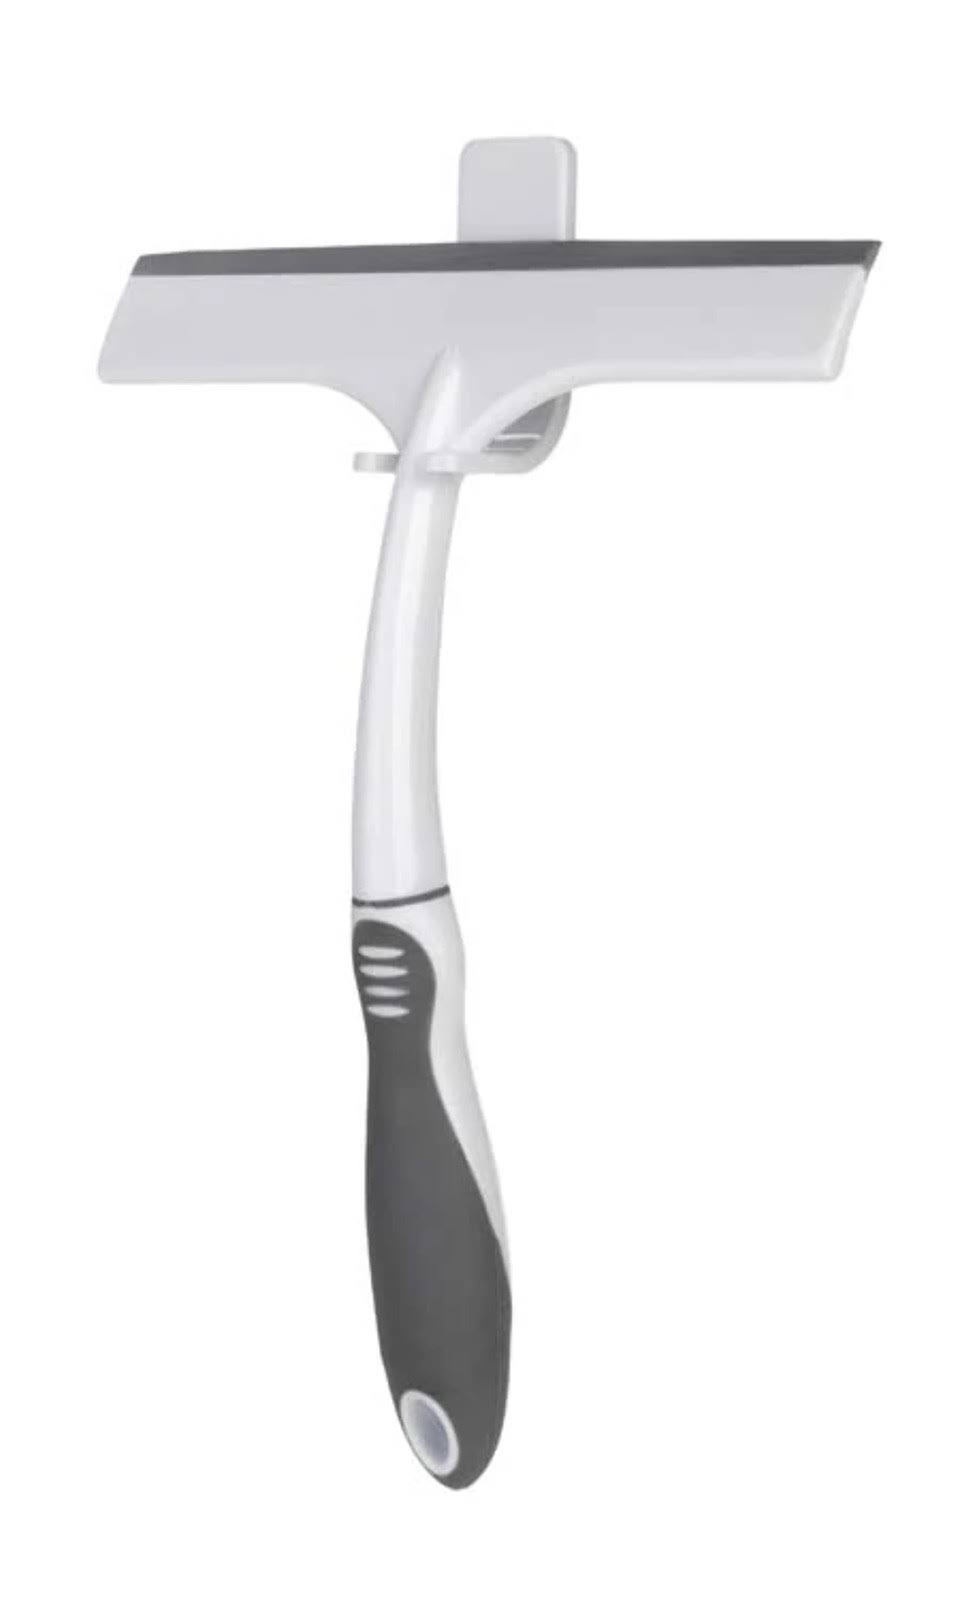 Croydex B-Smart Squeegee and Holder - White/Grey, 270mm